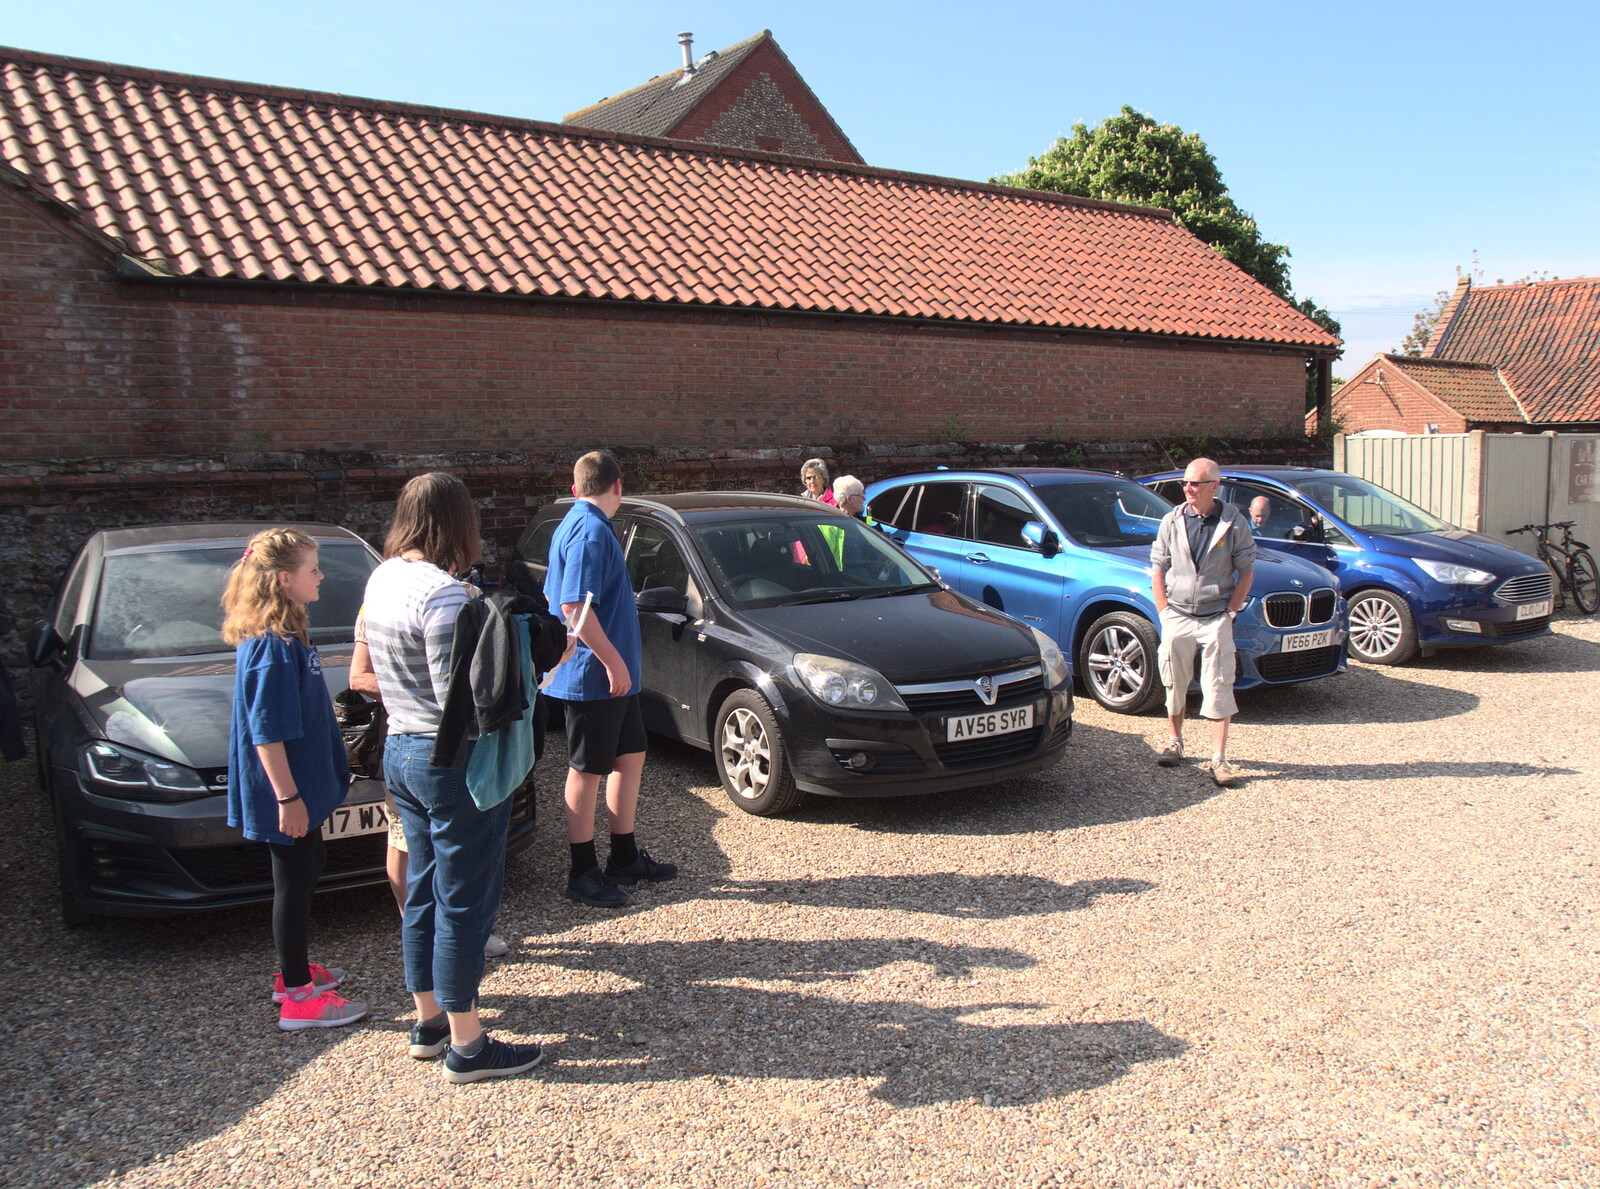 The riders assemble in the car park from The BSCC Weekend Away, Holt, Norfolk - 12th May 2018